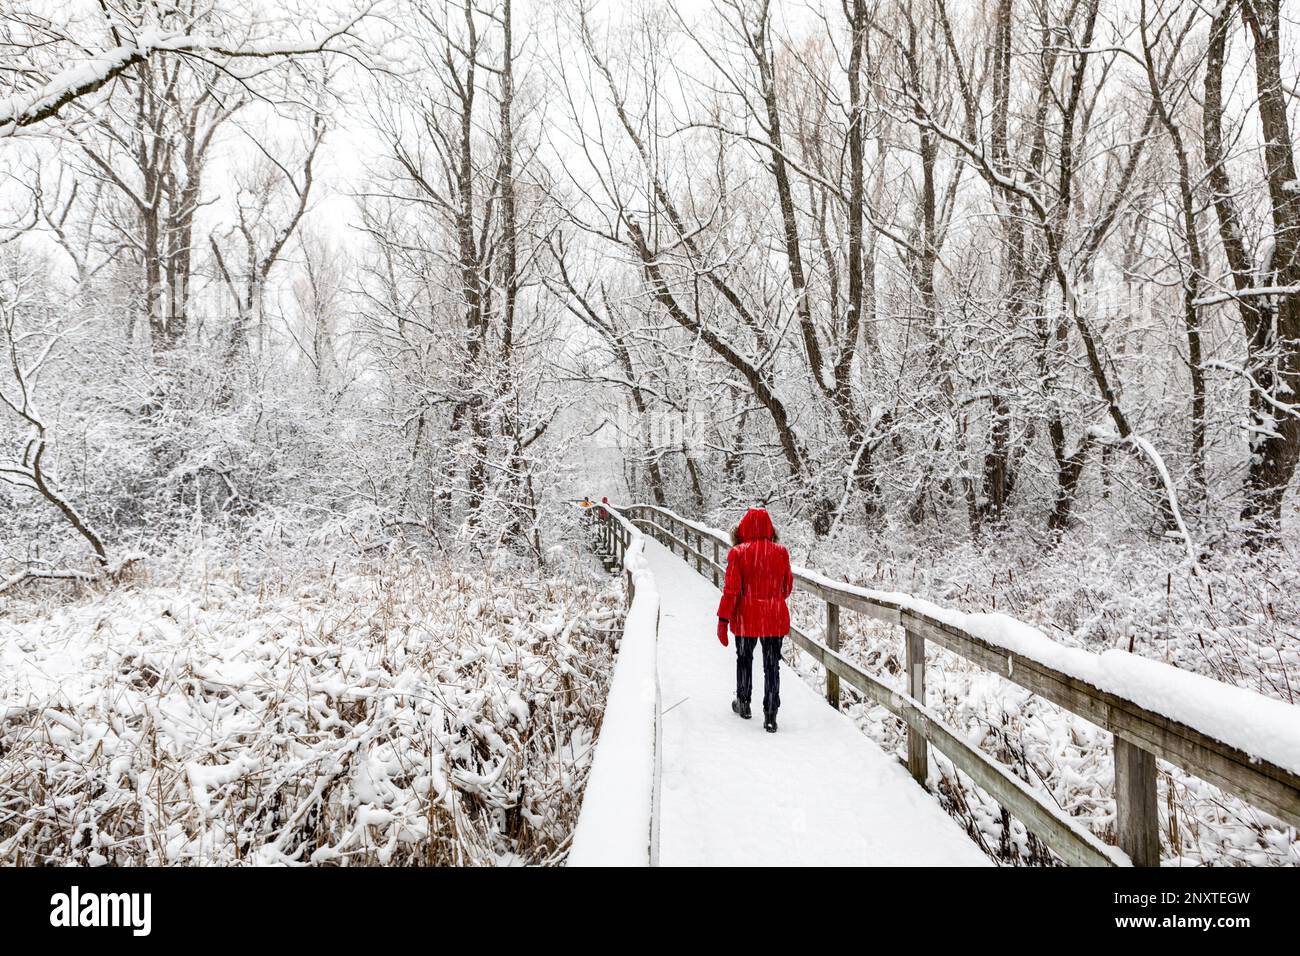 Stock photo of a woman in a red coat walking alone in a winter scene. Stock Photo